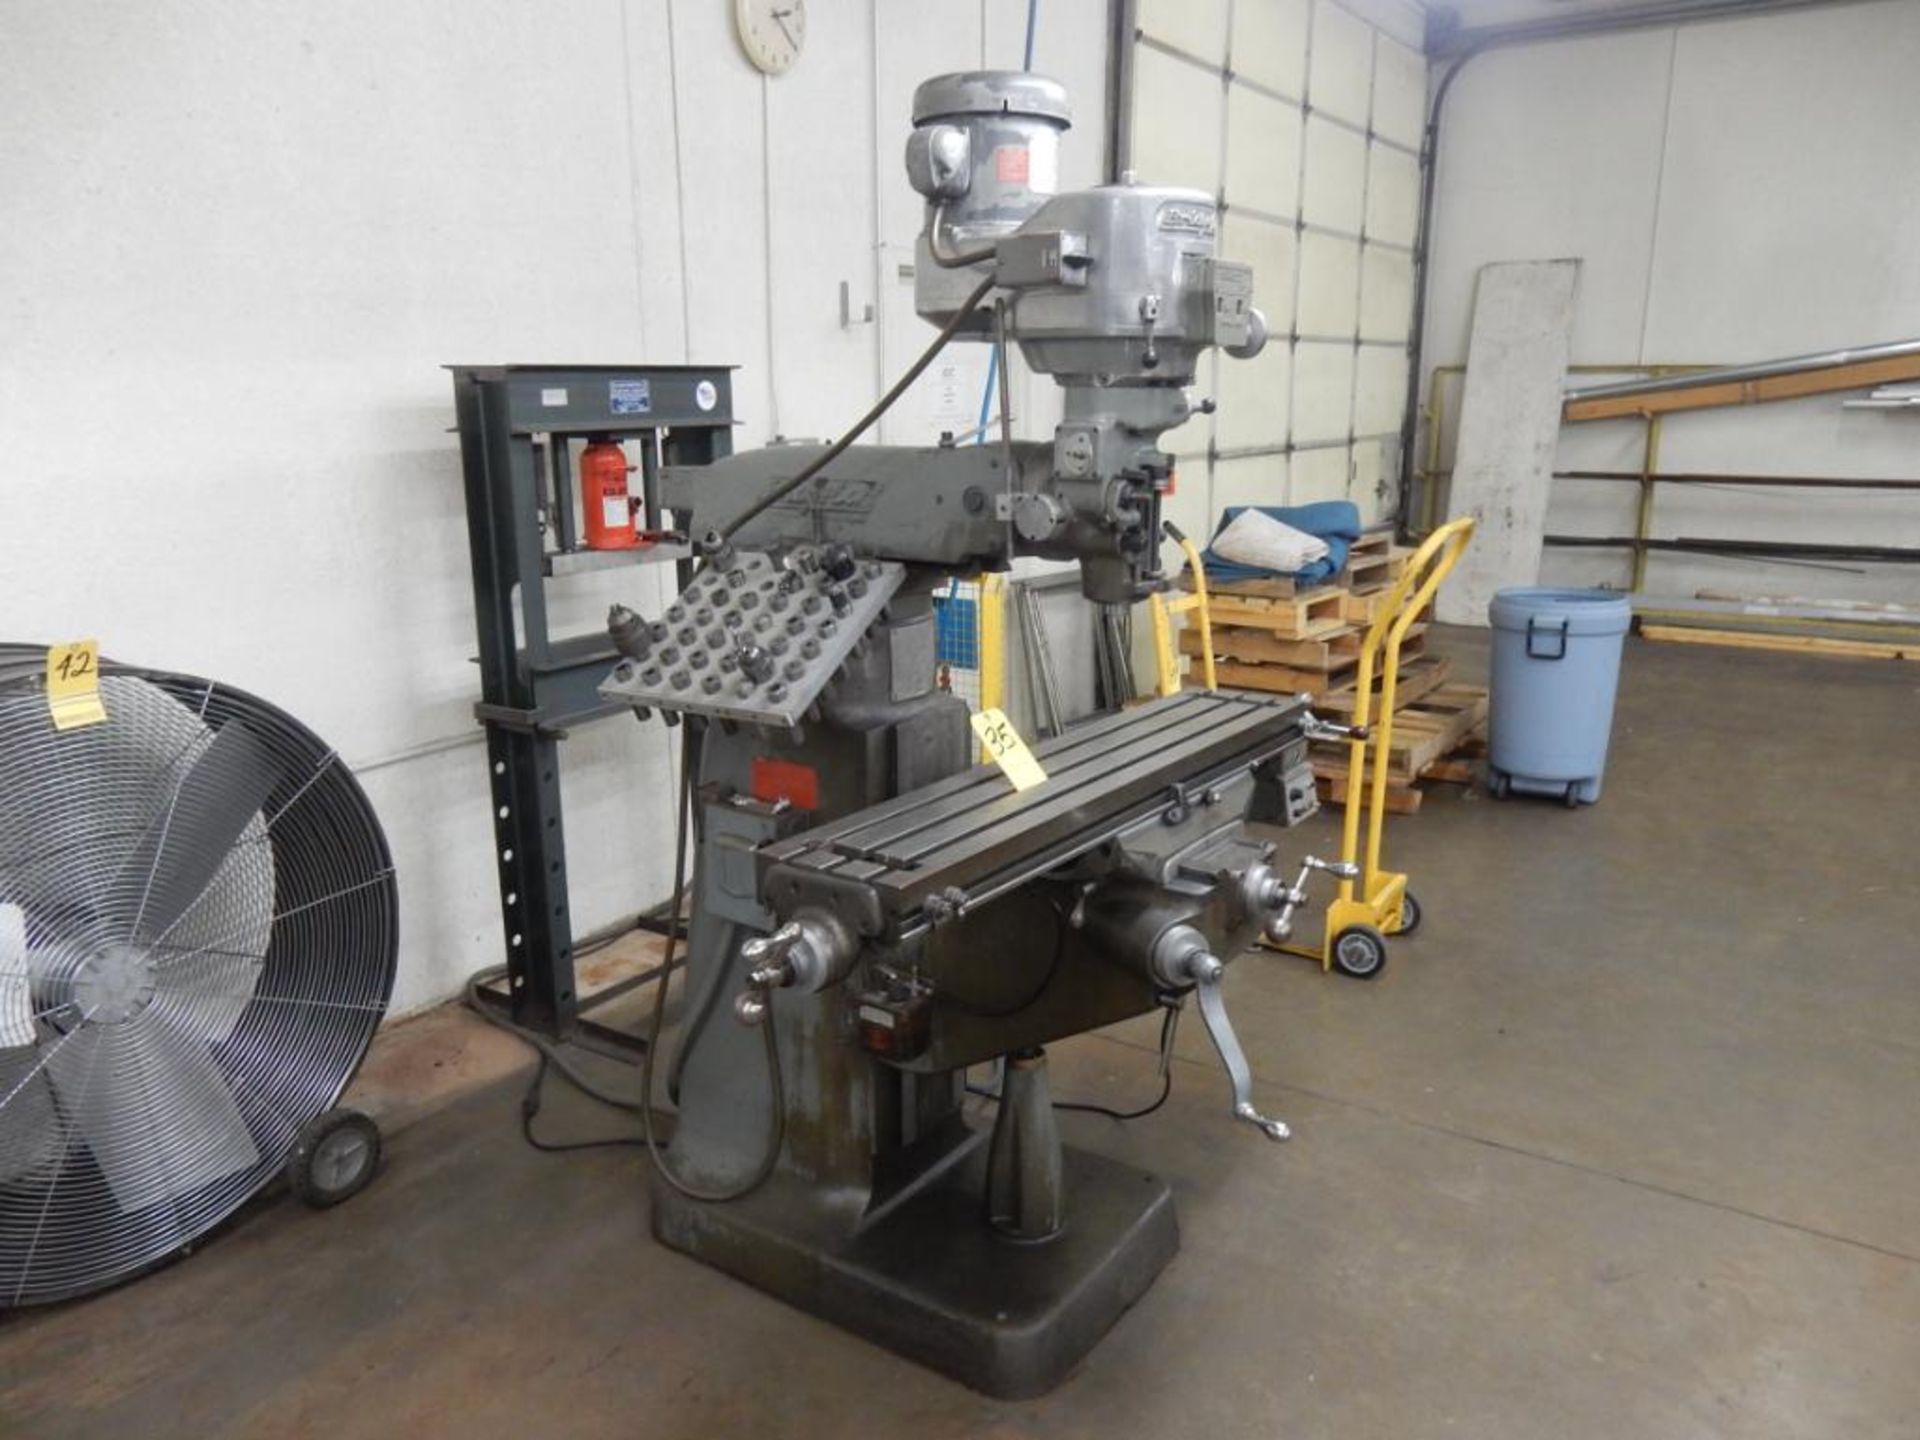 BRIDGEPORT SERIES 1-2HP VERT. MILL, S/N 214441, V.S., 9" X 48" TABLE, POWER FEED, COLLETS, CHUCKS, A - Image 2 of 3